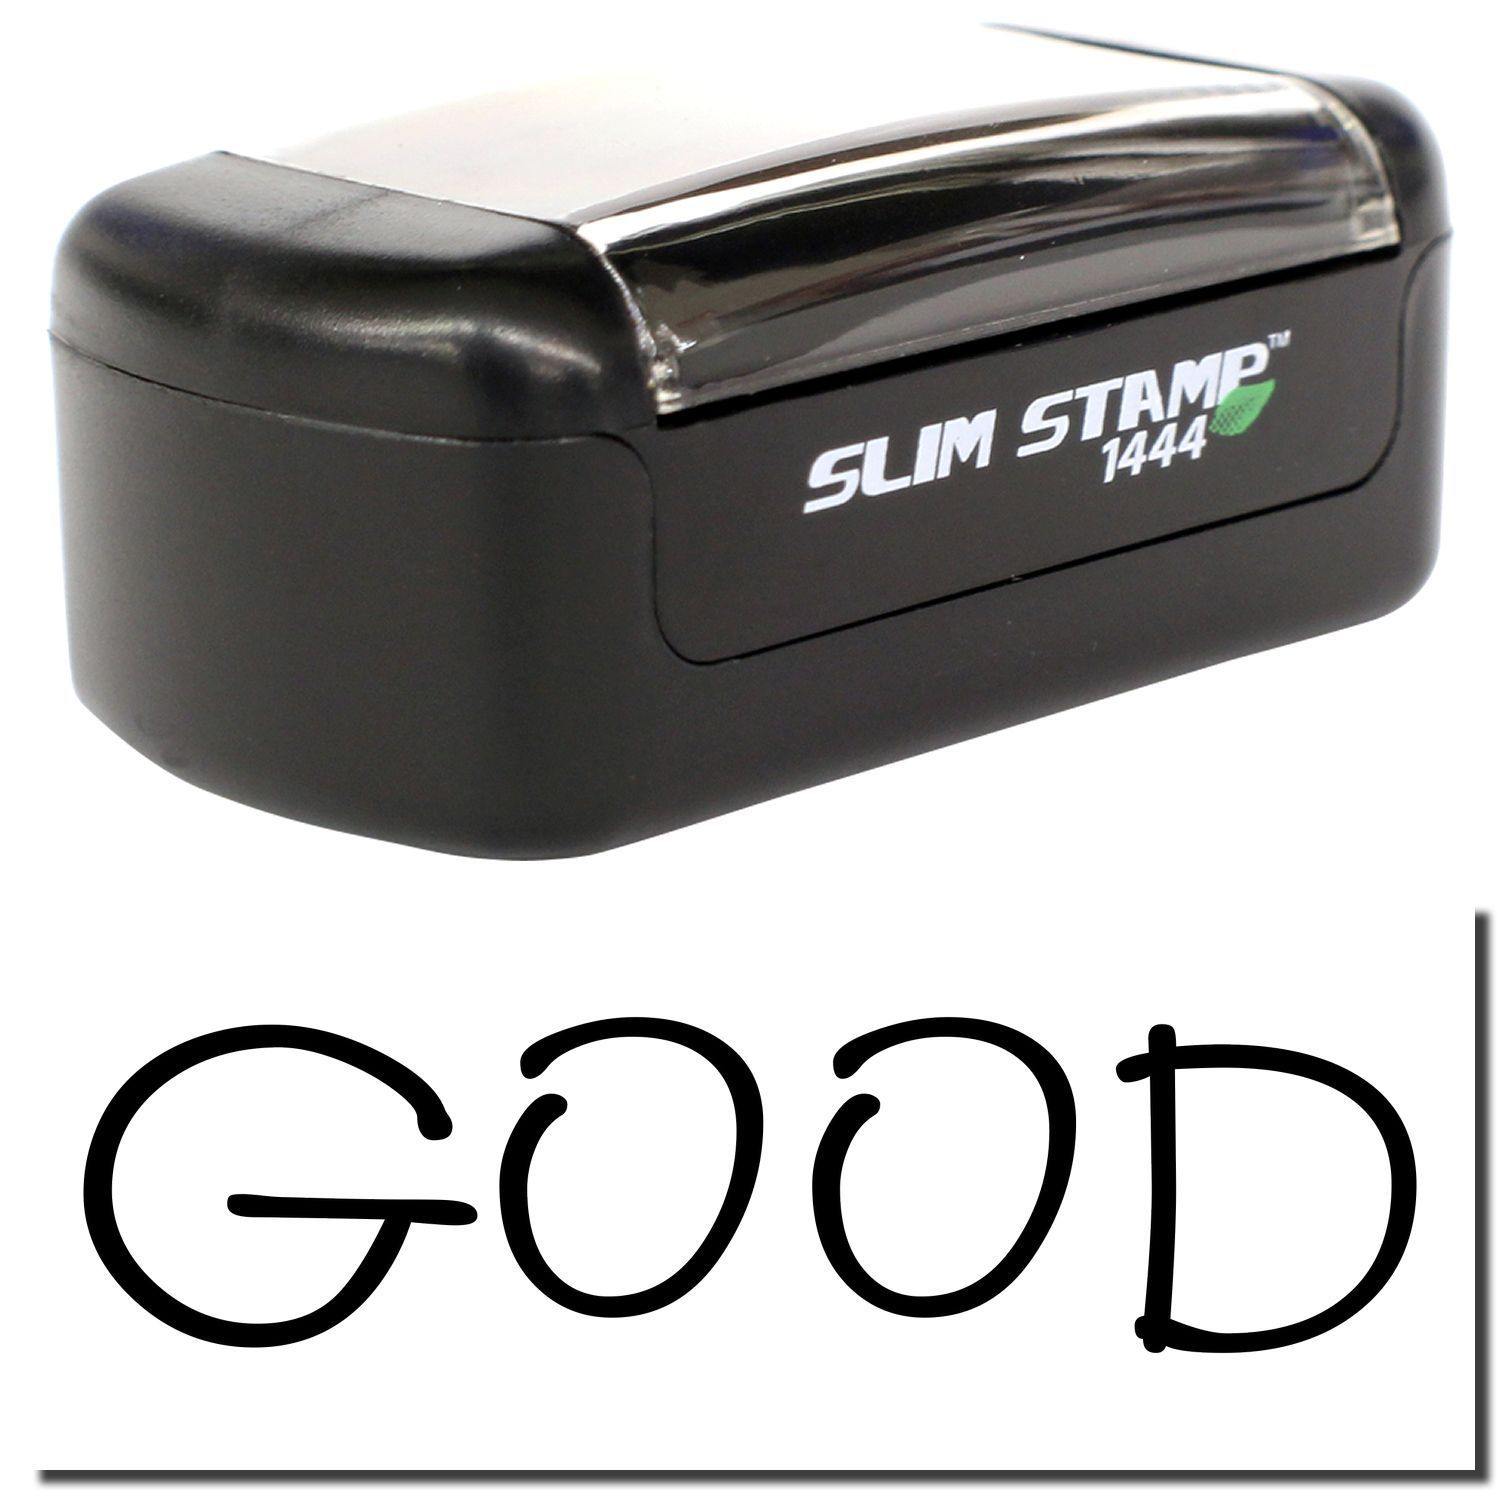 A stock office pre-inked stamp with a stamped image showing how the text "GOOD" is displayed after stamping.